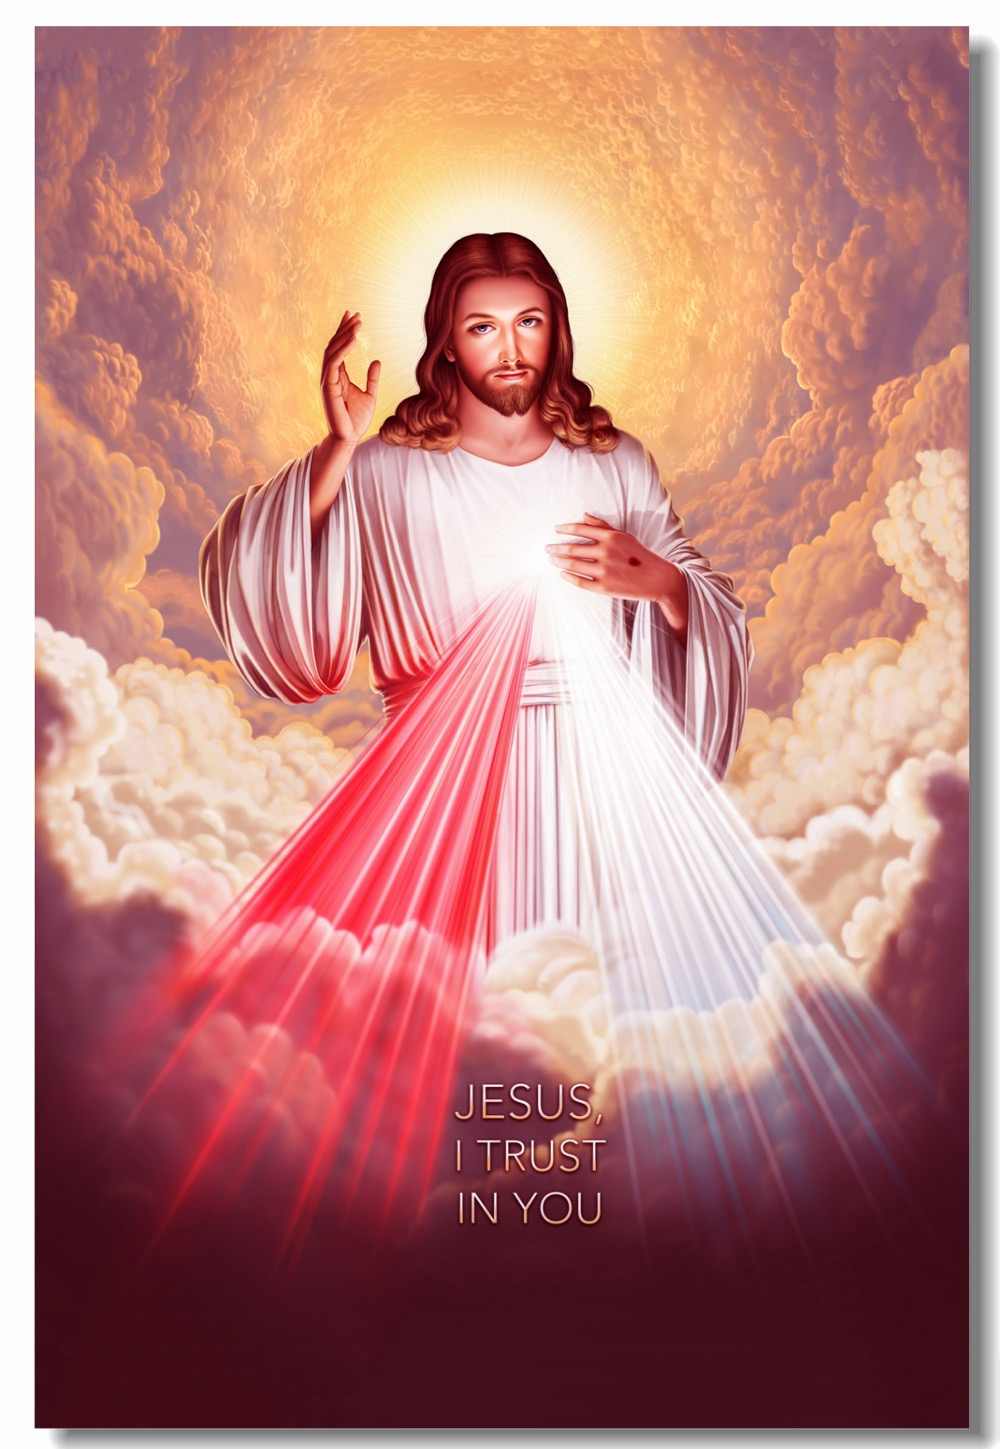 Custom Canvas Wall Decor Jesus Christ Poster God Bless Second Coming Wall Sticker Divine Mercy Wallpaper Bedroom Painting #. wall sticker. wall decorjesus christ